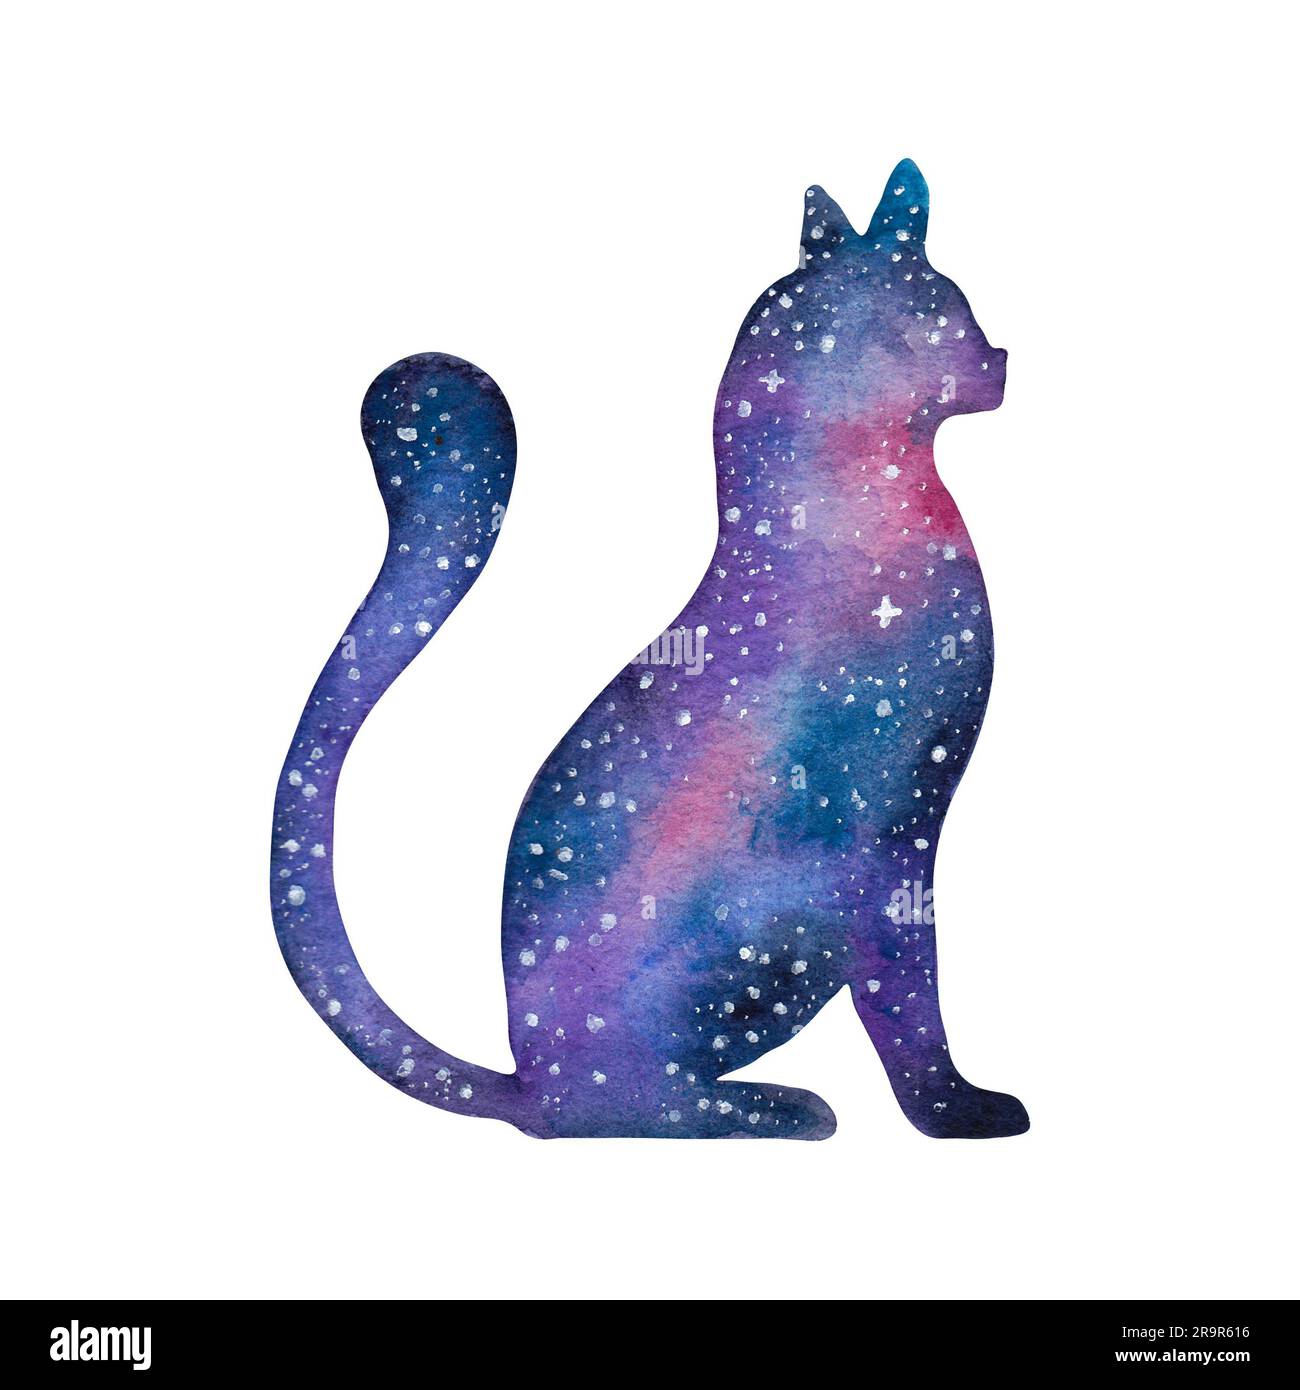 Galaxy cat, fantasy, space, shape. Perfect for kids room decoration, baby clothes.Watercolor illustration. Stock Photo